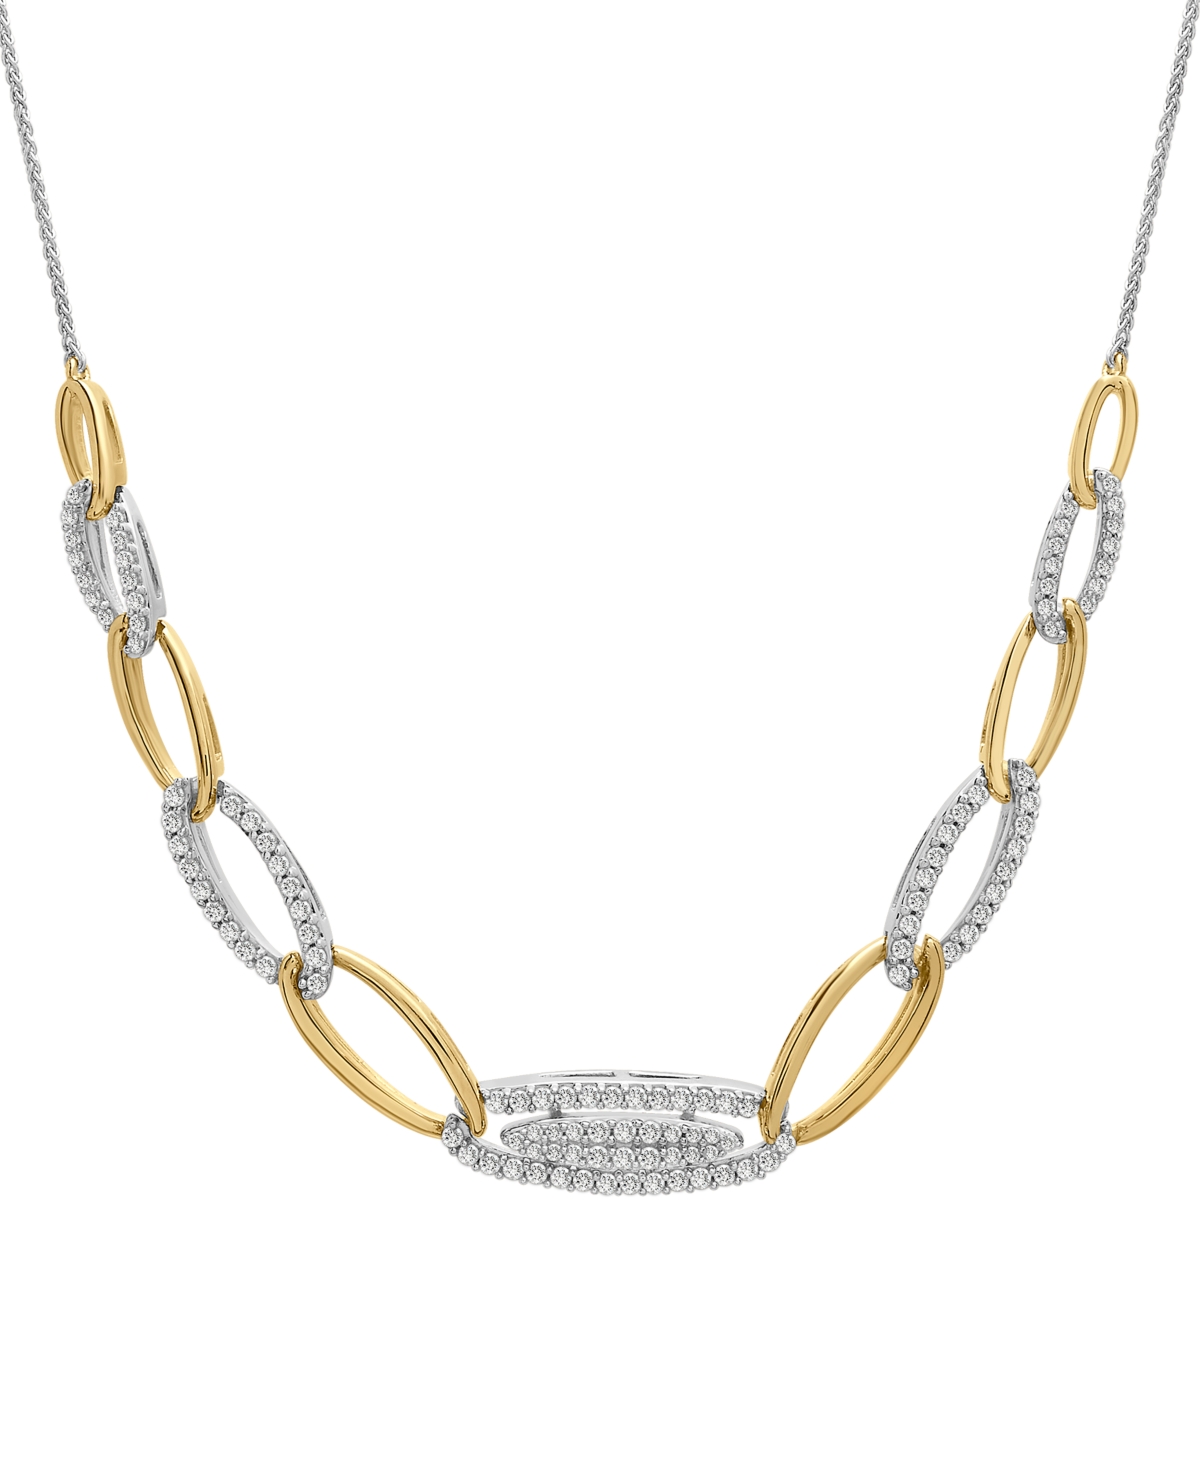 Wrapped In Love Diamond Chain Link Statement Necklace (1 Ct. T.w.) In Sterling Silver & 14k Gold-plate, 16" + 4" Ext In Sterling Silver  K Gold-plate